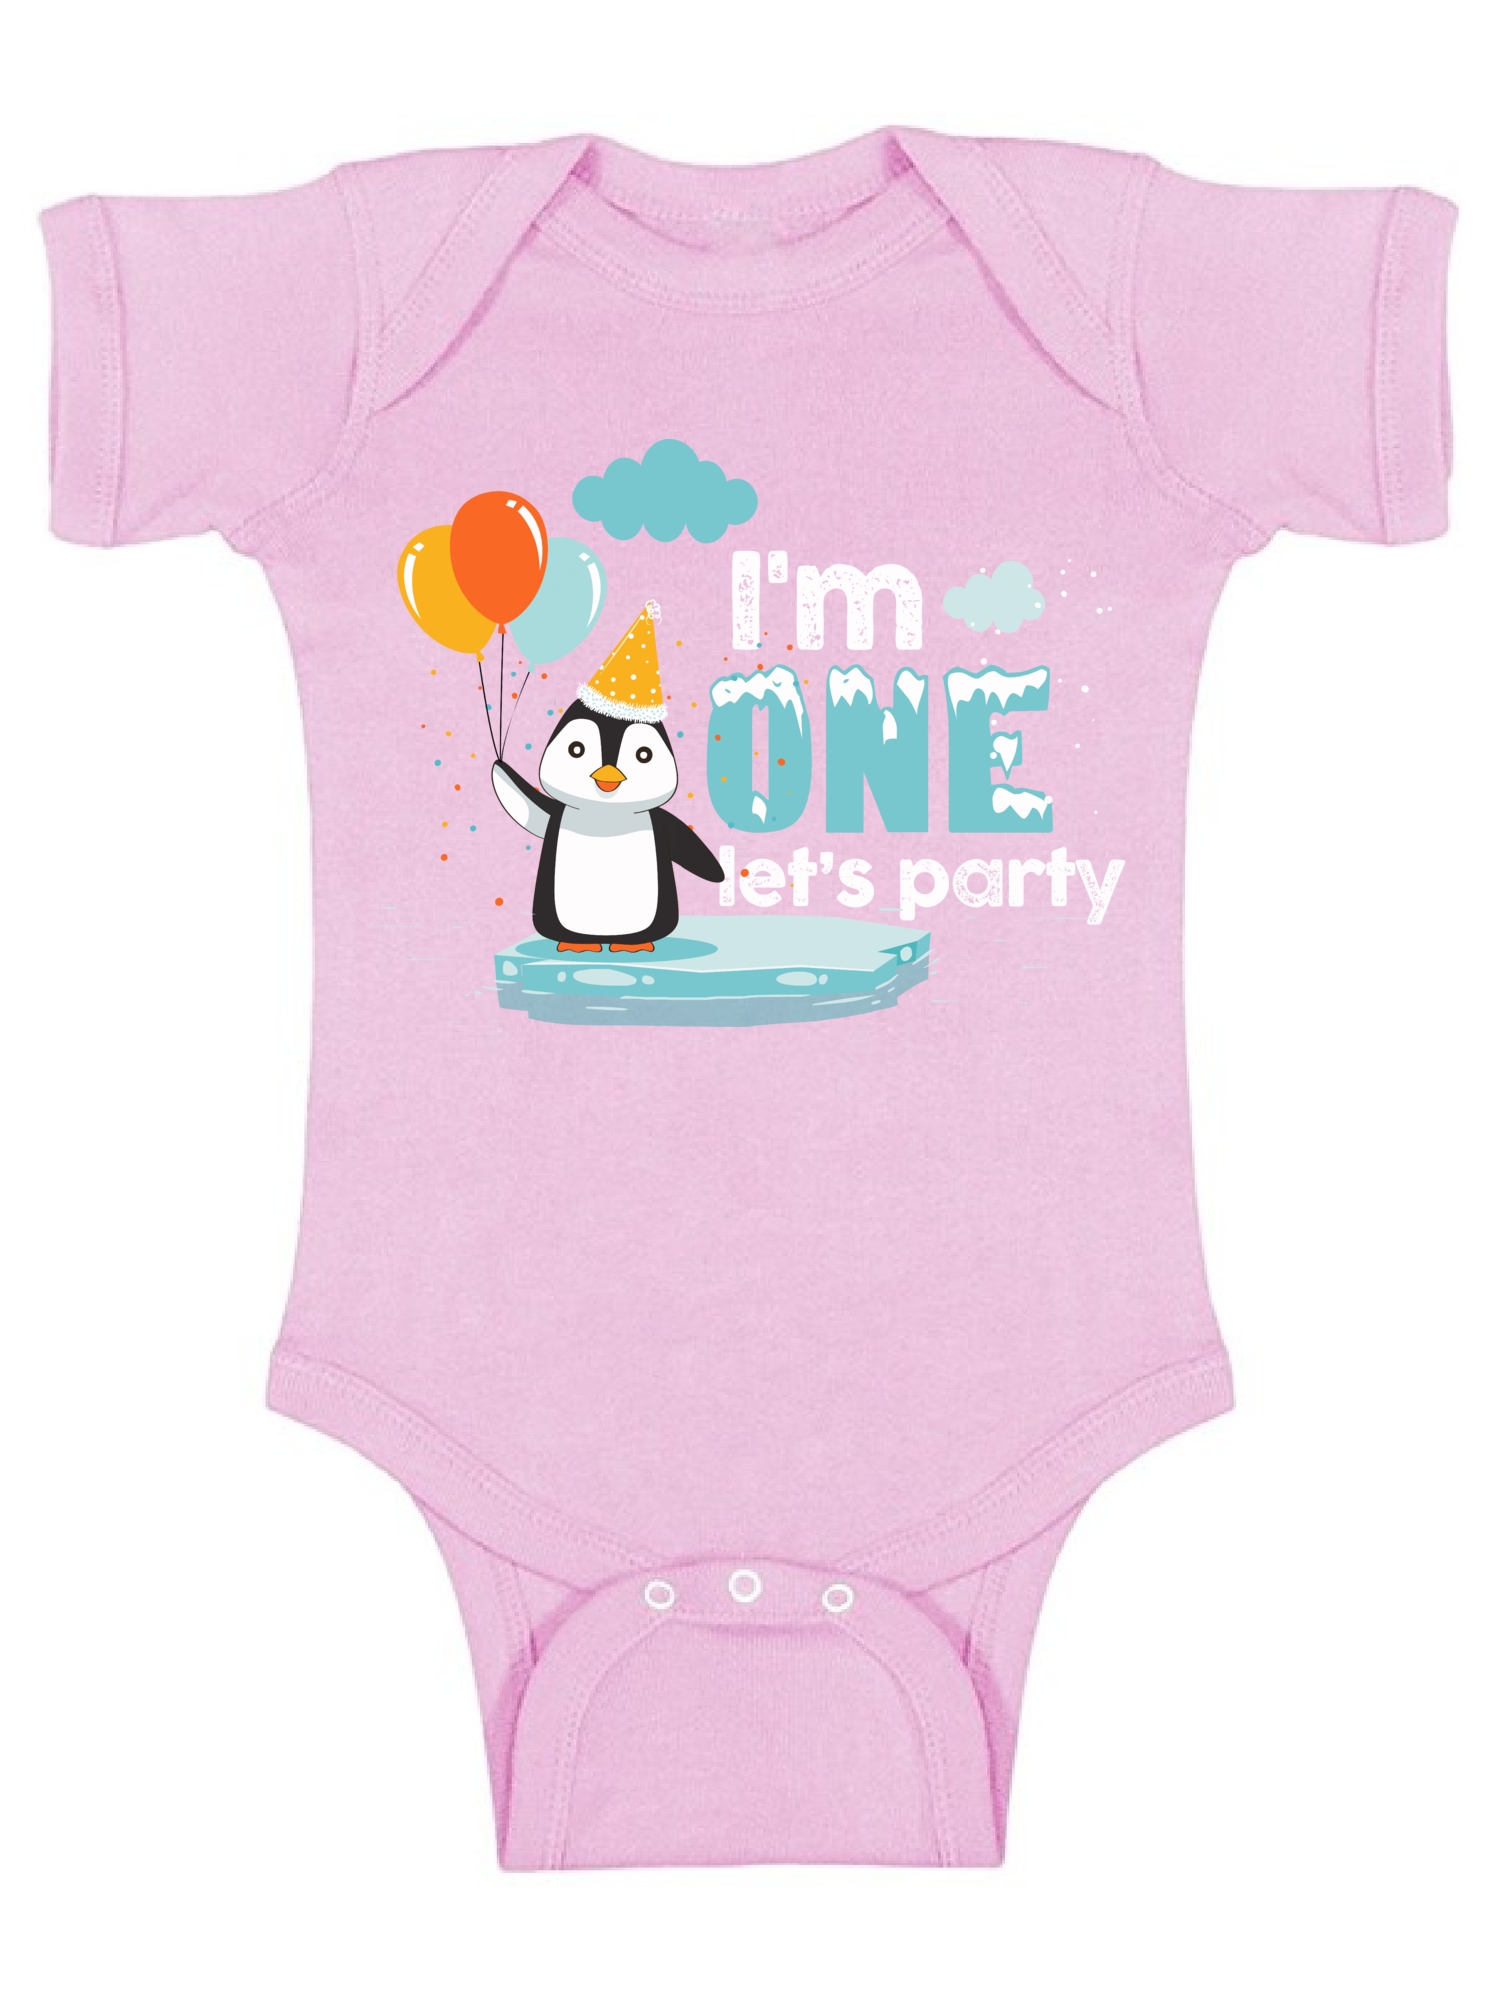 Awkward Styles First Birthday 1st Birthday Boy Bodysuit 1st B Day One Piece Baby Birthday Penguin Outfit for Baby Boy and Baby Girl Penguin Birthday Gifts Newborn Baby Girl Clothes - image 1 of 4